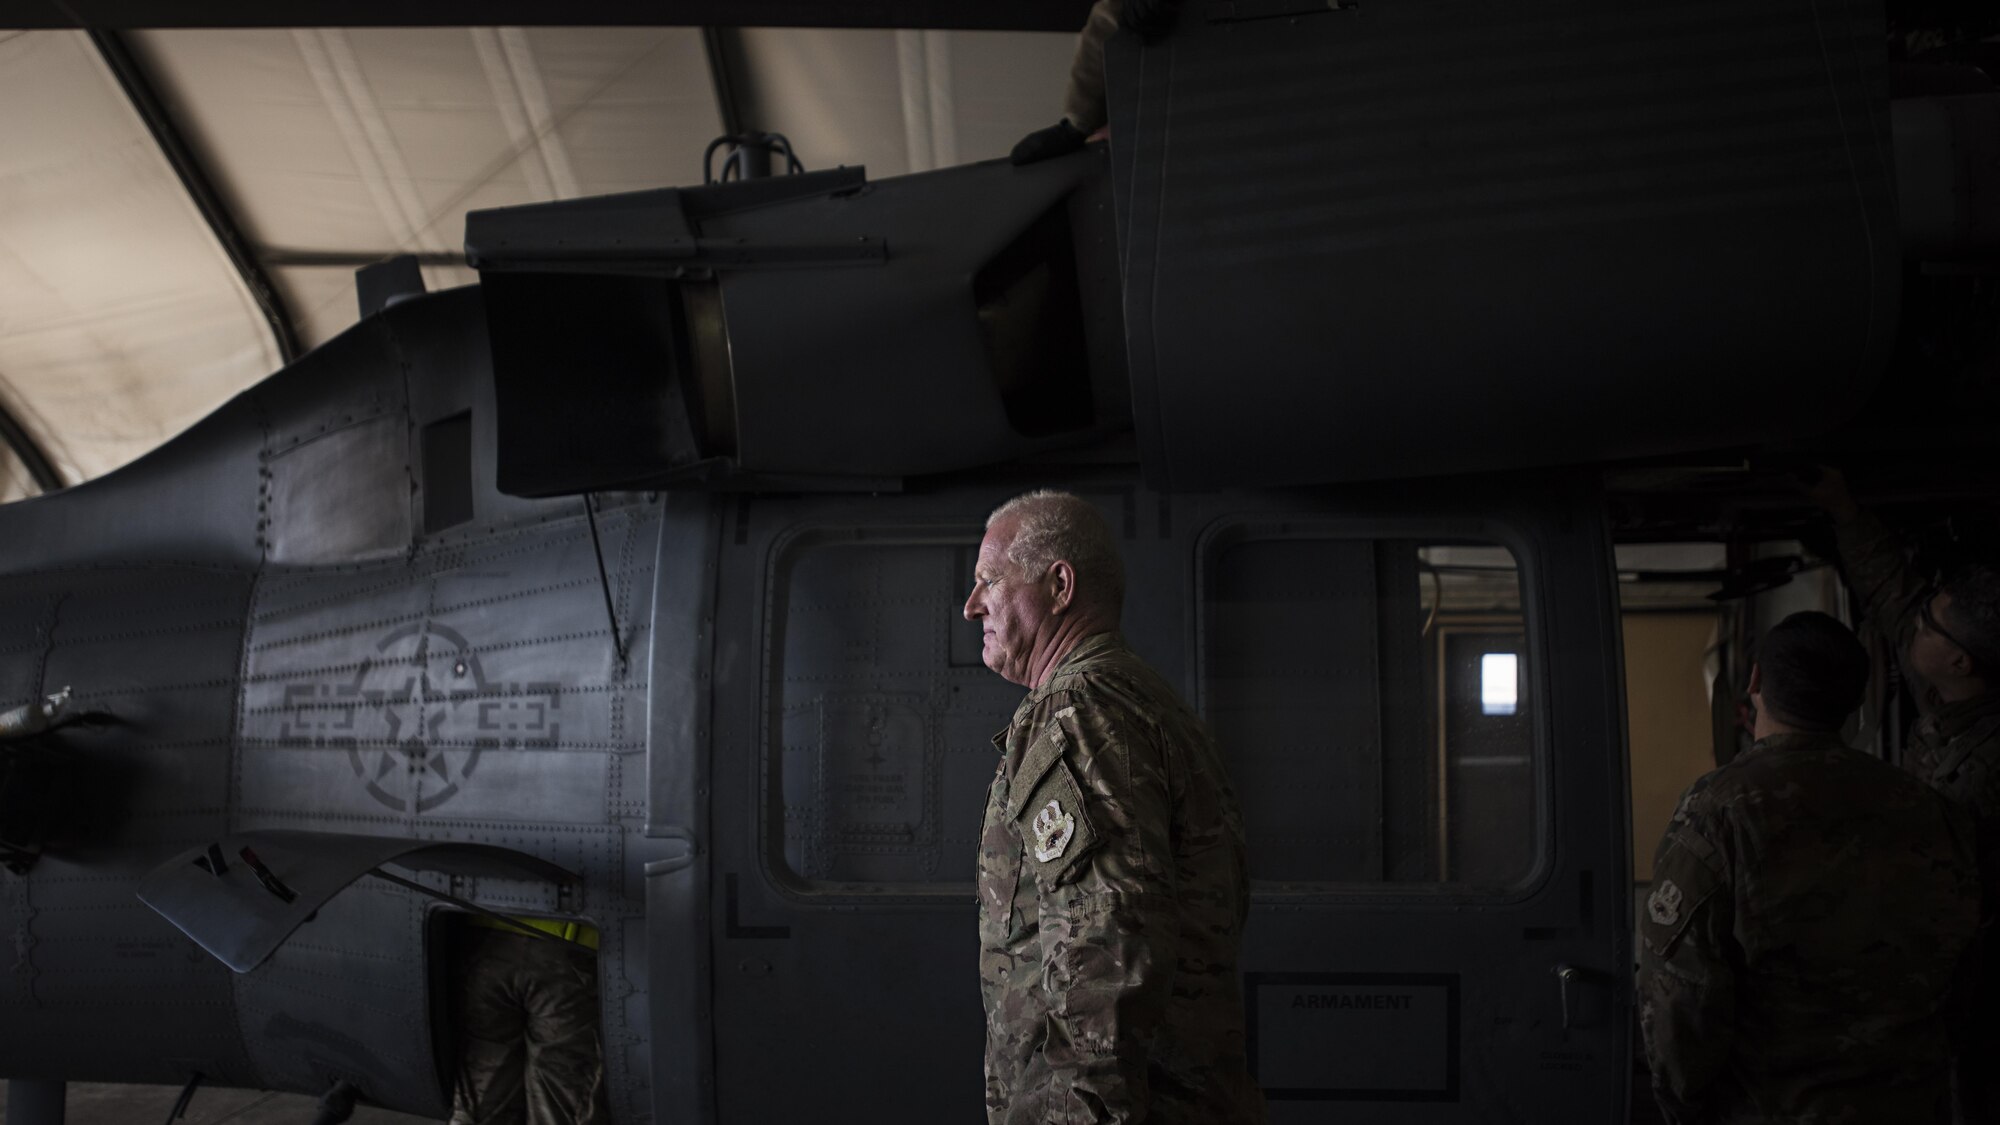 Master Sgt. James Dullaghan, 455th Expeditionary Aircraft Maintenance Squadron Helicopter Maintenance Unit HH-60 Pave Hawk dedicated crew chief, walks past his aircraft during a 50-hour inspection Jan. 19, 2017 at Bagram Airfield Afghanistan. Dullaghan first enlisted in the Air Force in 1978 and returned in 2009 after a twenty-year break in service. (U.S. Air Force photo by Staff Sgt. Katherine Spessa)